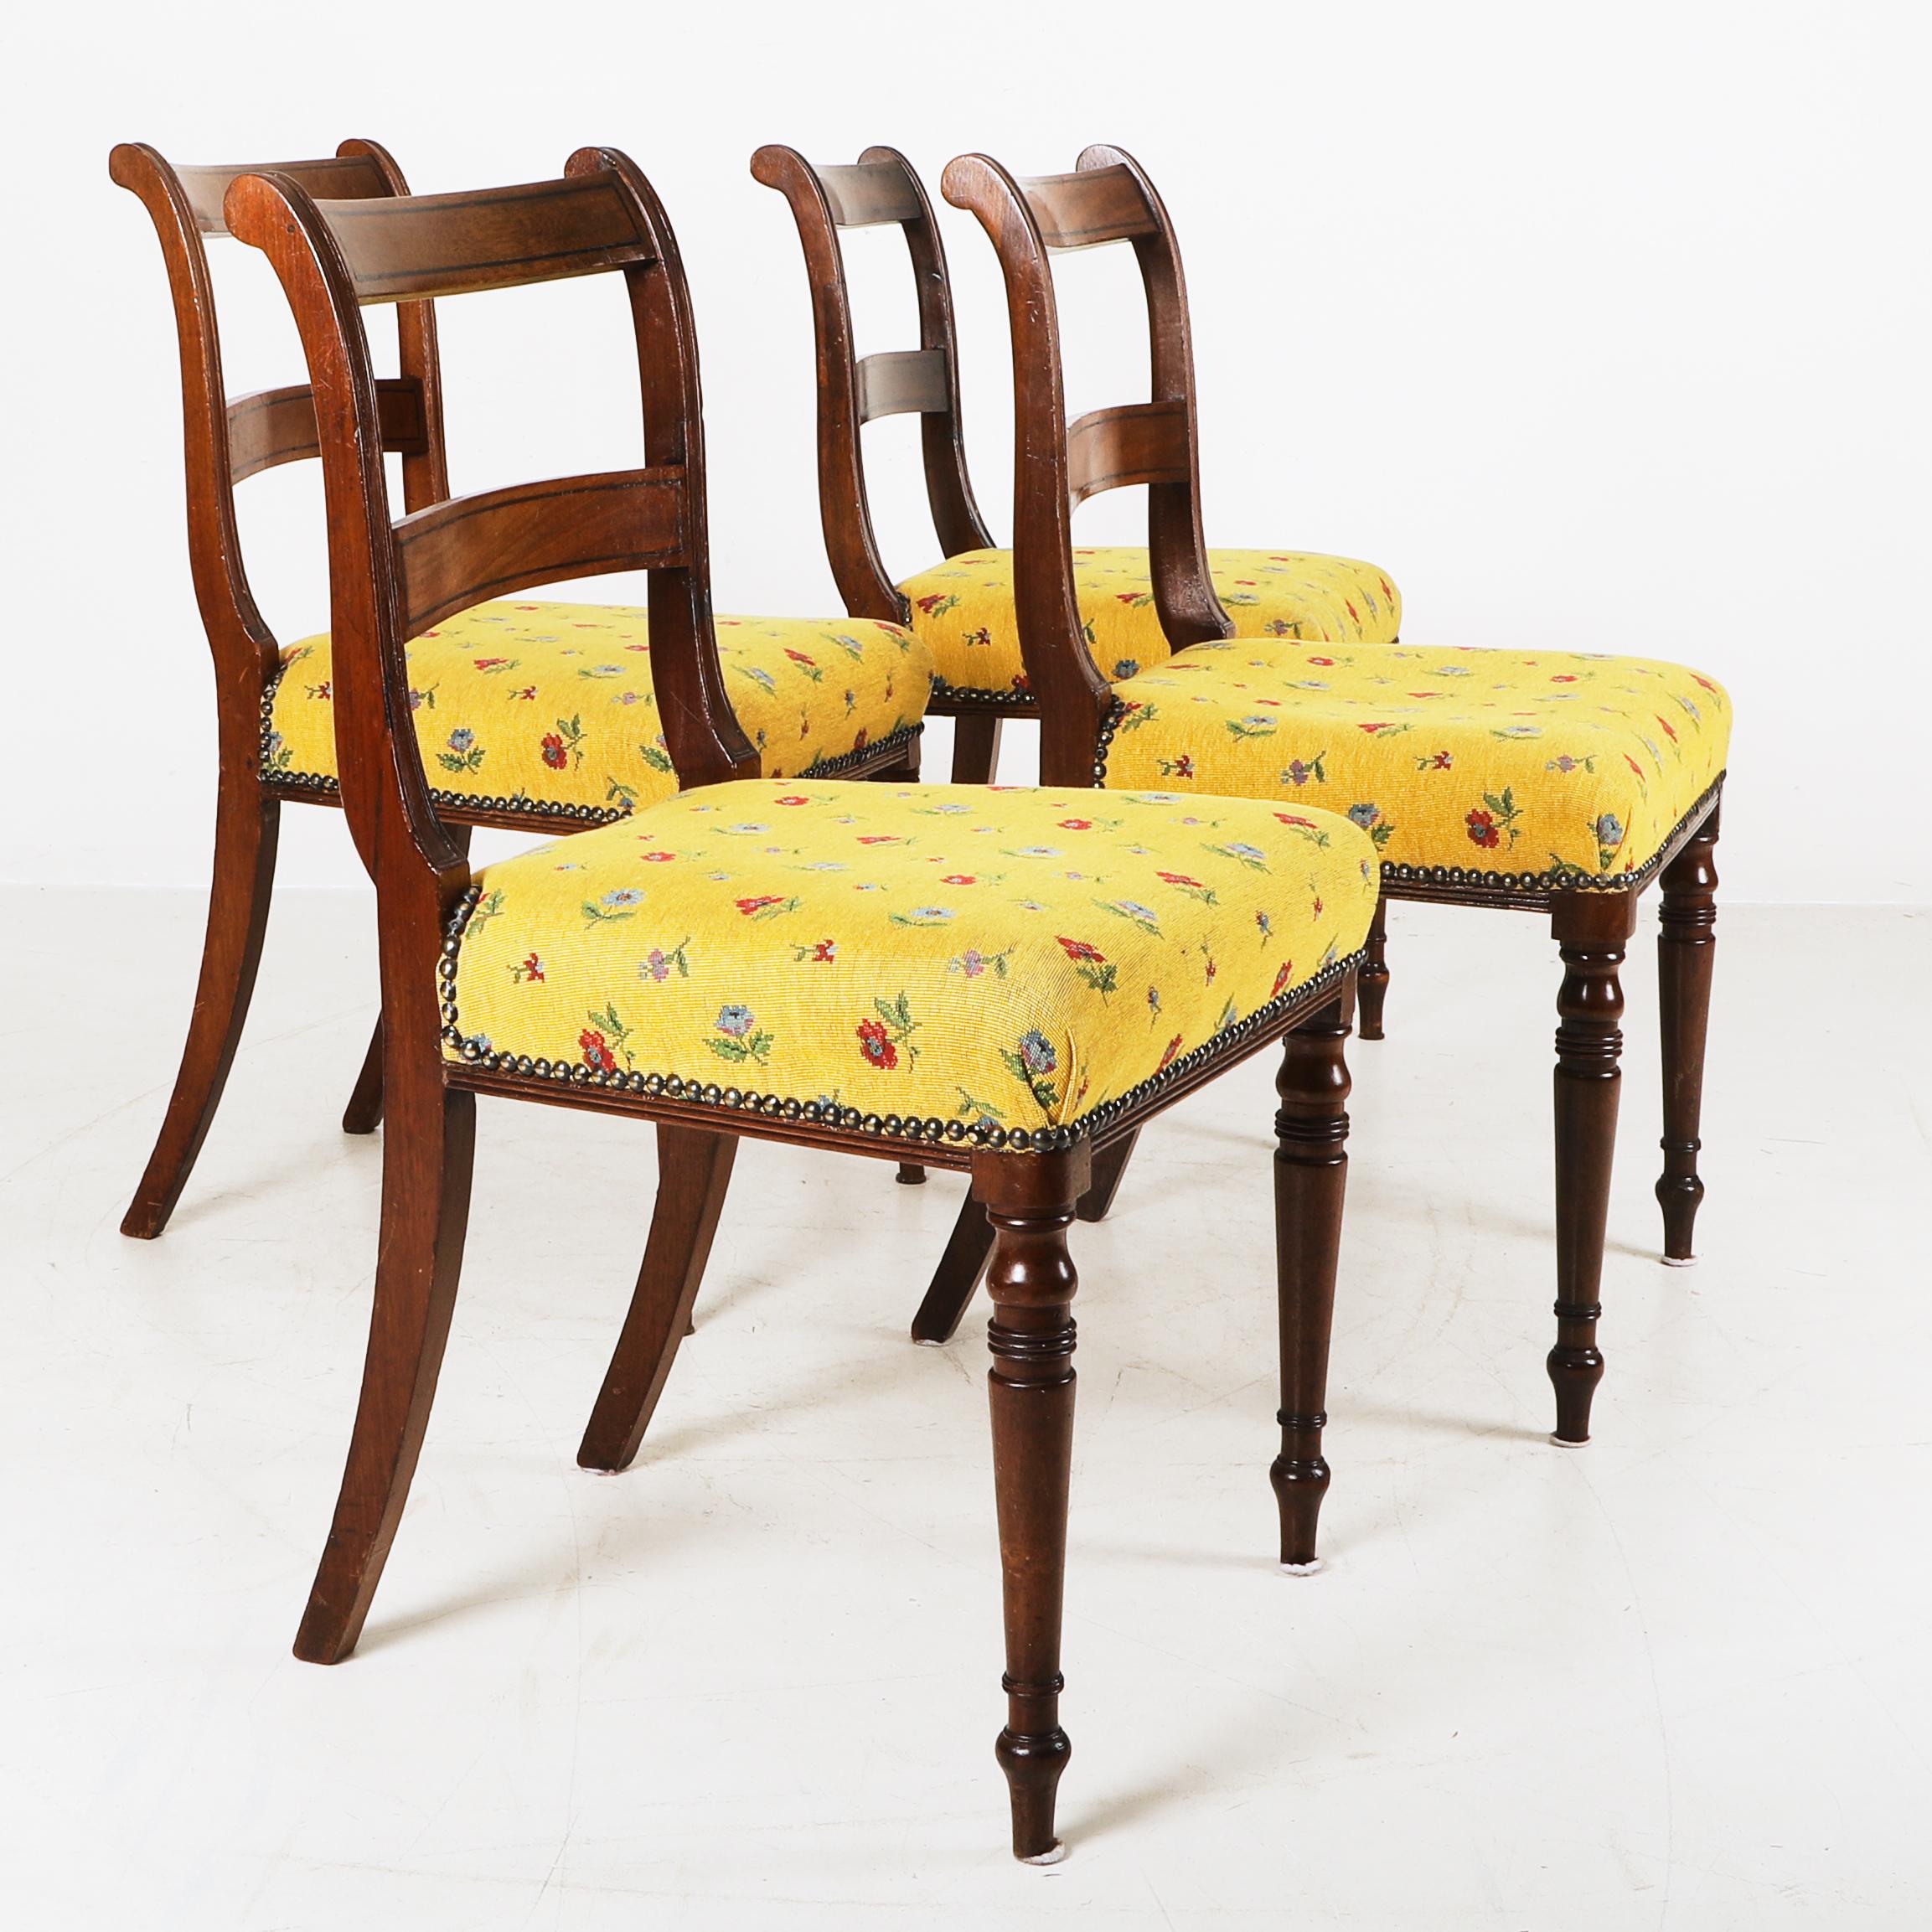 Armchairs and dining chairs, early 1900s, veneered with mahogany, turned legs, firmly upholstered seat with brass rivets, curved back, seat height approx. 48 cm
Lovely! 
Set of 6 chairs, 2 in set as armchairs 
Veneered mahogany 
Upholstered seat